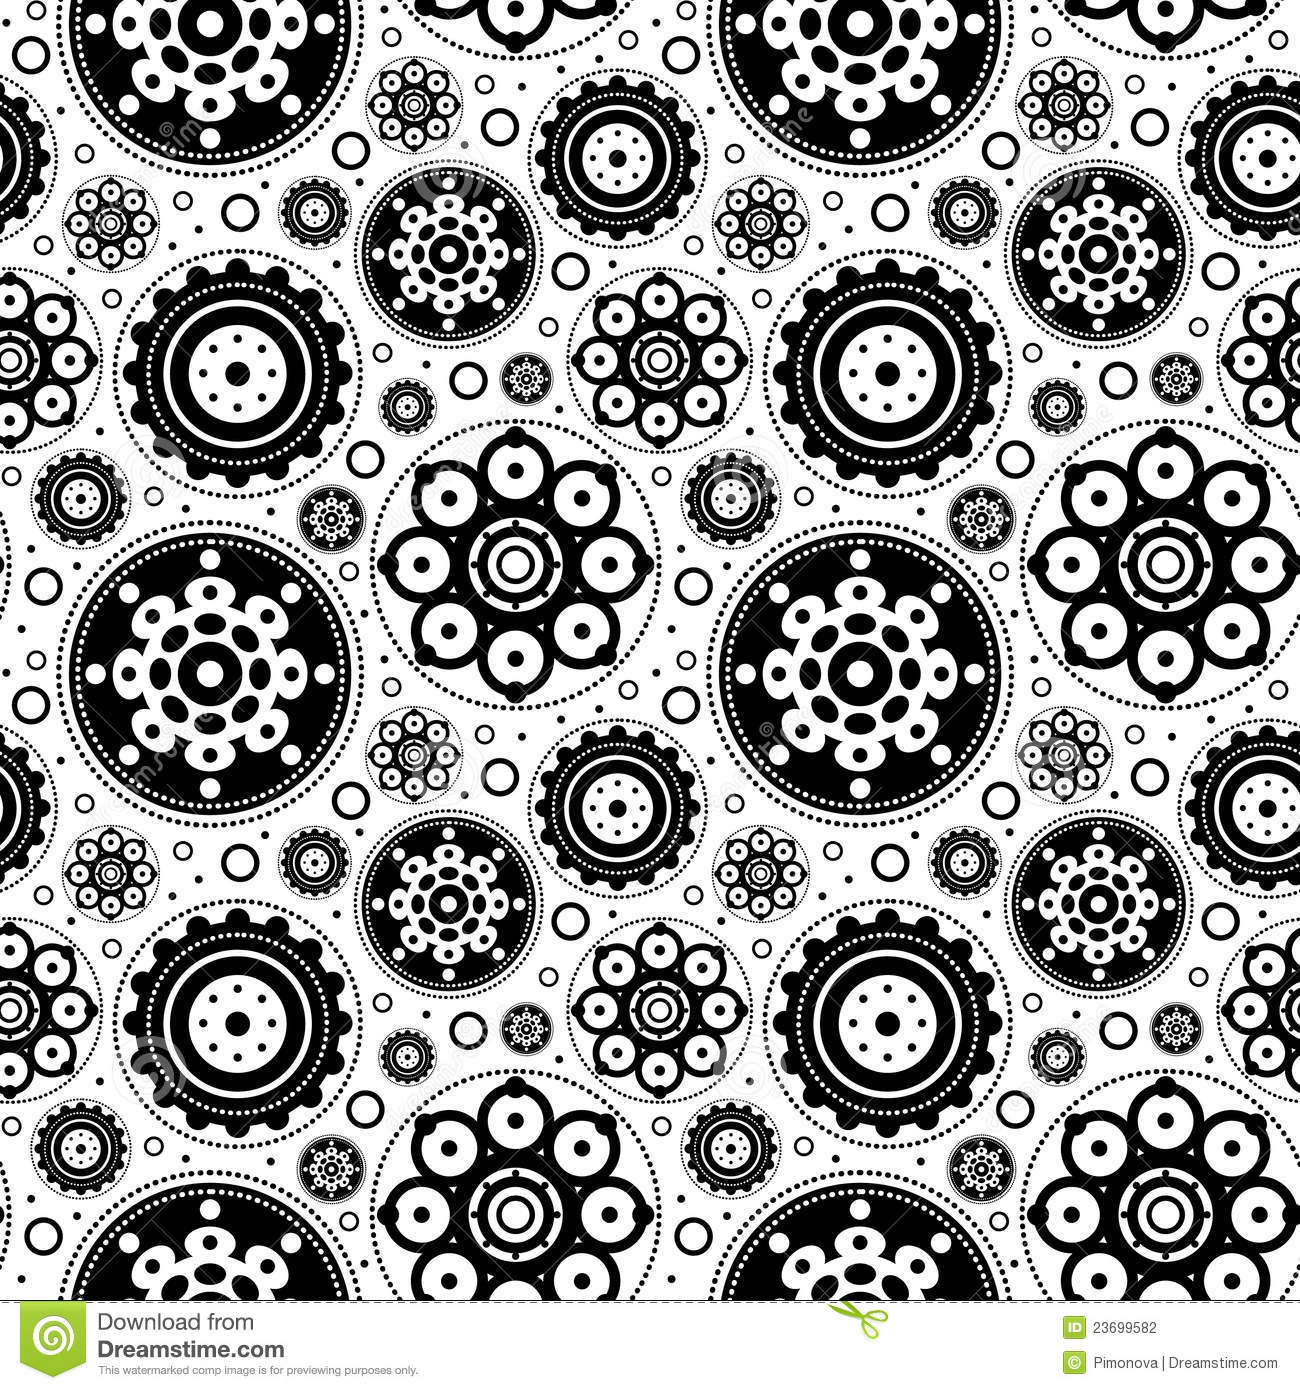 Abstract Floral Patterns Black and White